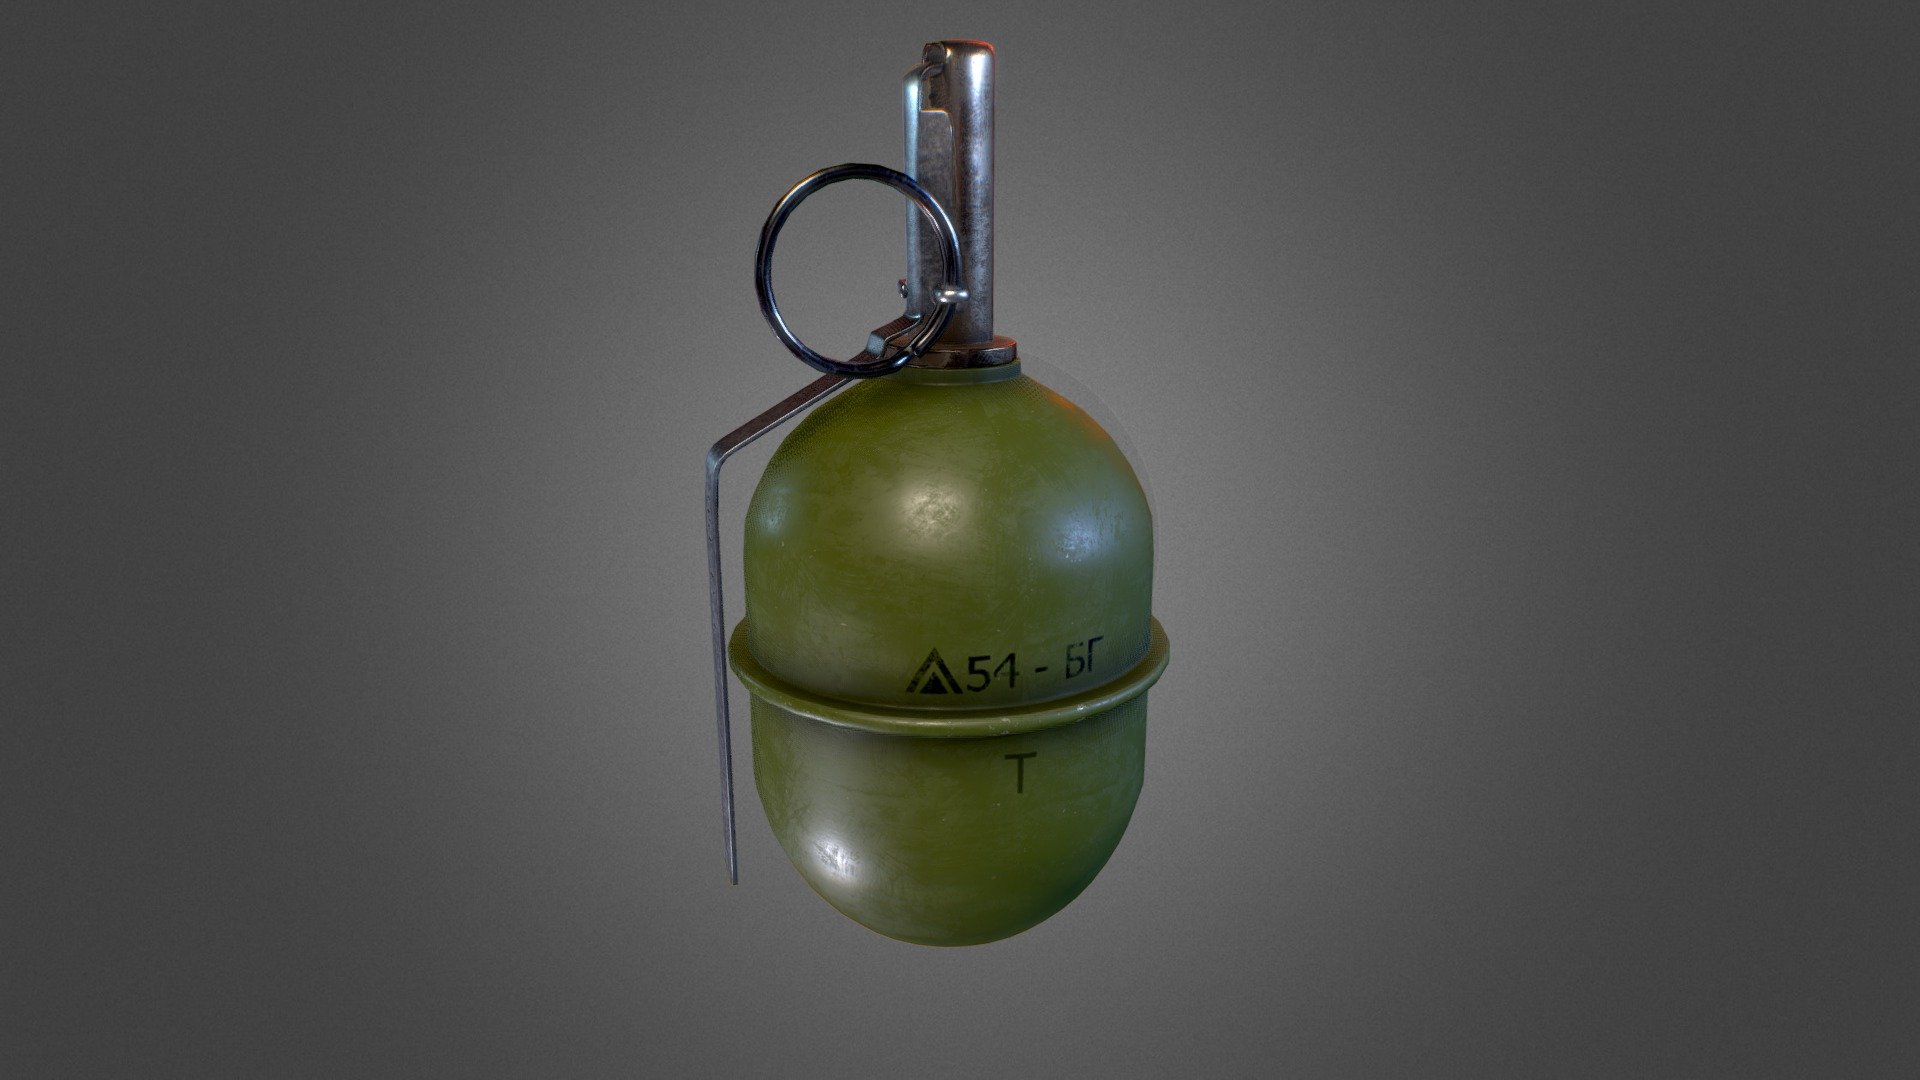 The RGD-5 (Ruchnaya Granata Distantsionnaya) English &lsquo;Distance Hand Grenade' or &lsquo;Long-Range Hand Grenade', is a post-World War II Soviet anti-personnel fragmentation grenade, designed in the early 1950s. RGD-5 was accepted to service in 1954. It is still in service with many of Russia's former client states and has been supplied to Iraq as well as other Arab nations.

Textures all 1024 res for pbr materials:

Albedo
Normal
Metalness
Roughness
AO
 - RGD 5 Grenade - 3D model by B1endMan 3d model